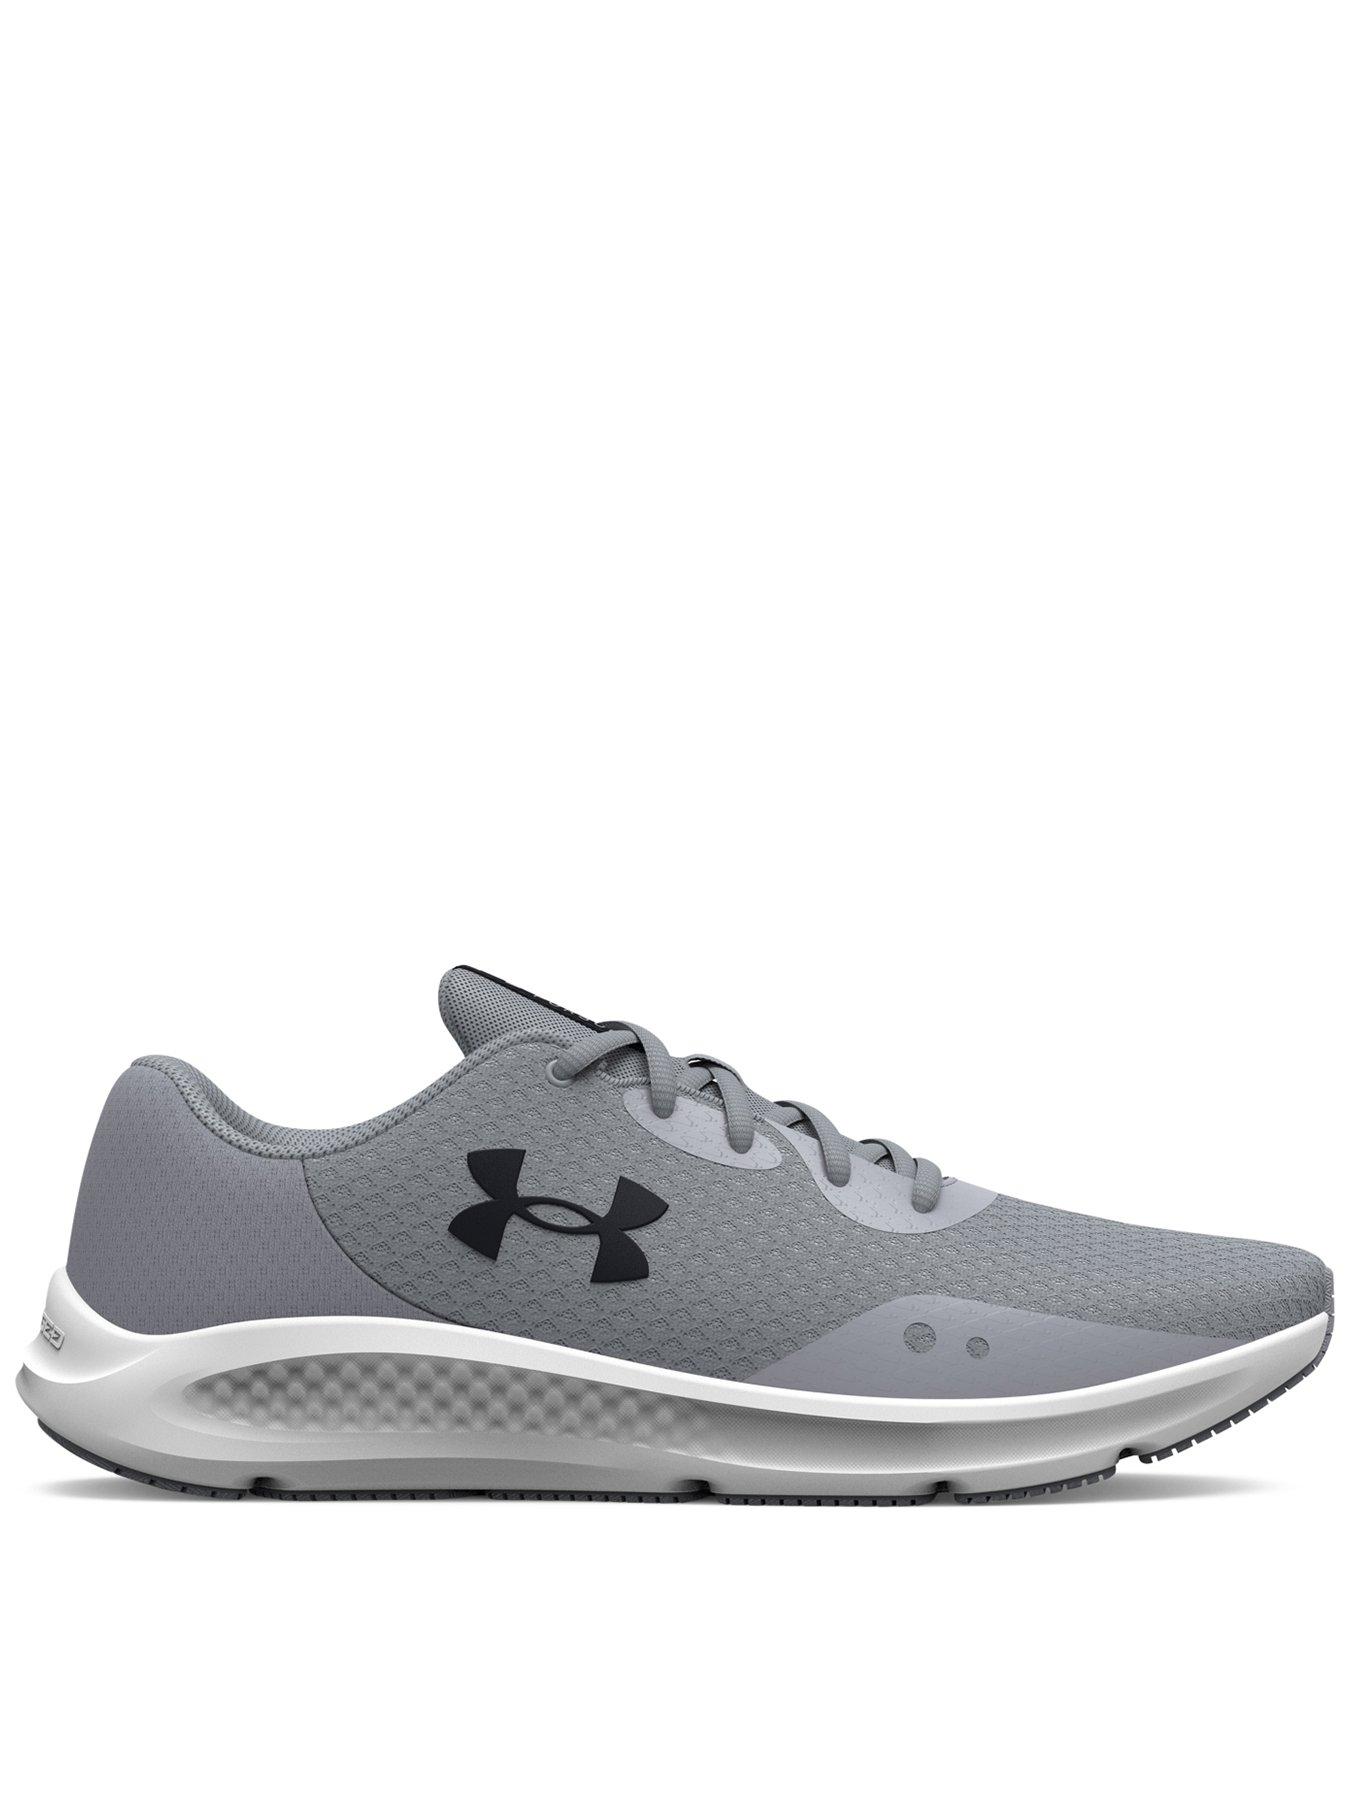 UNDER ARMOUR Running Charged Pursuit 3 - Grey/Black | very.co.uk